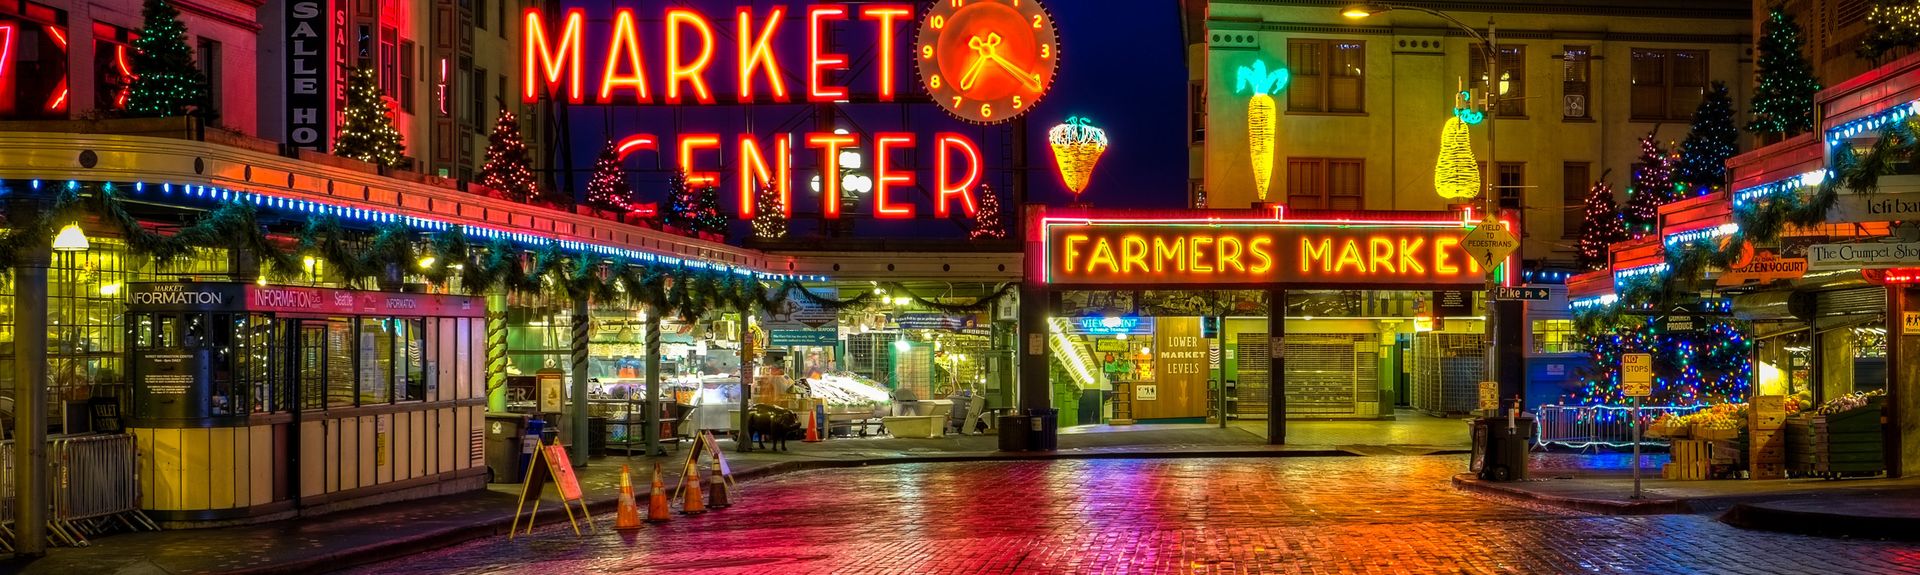 Top 20 Pike Place Market